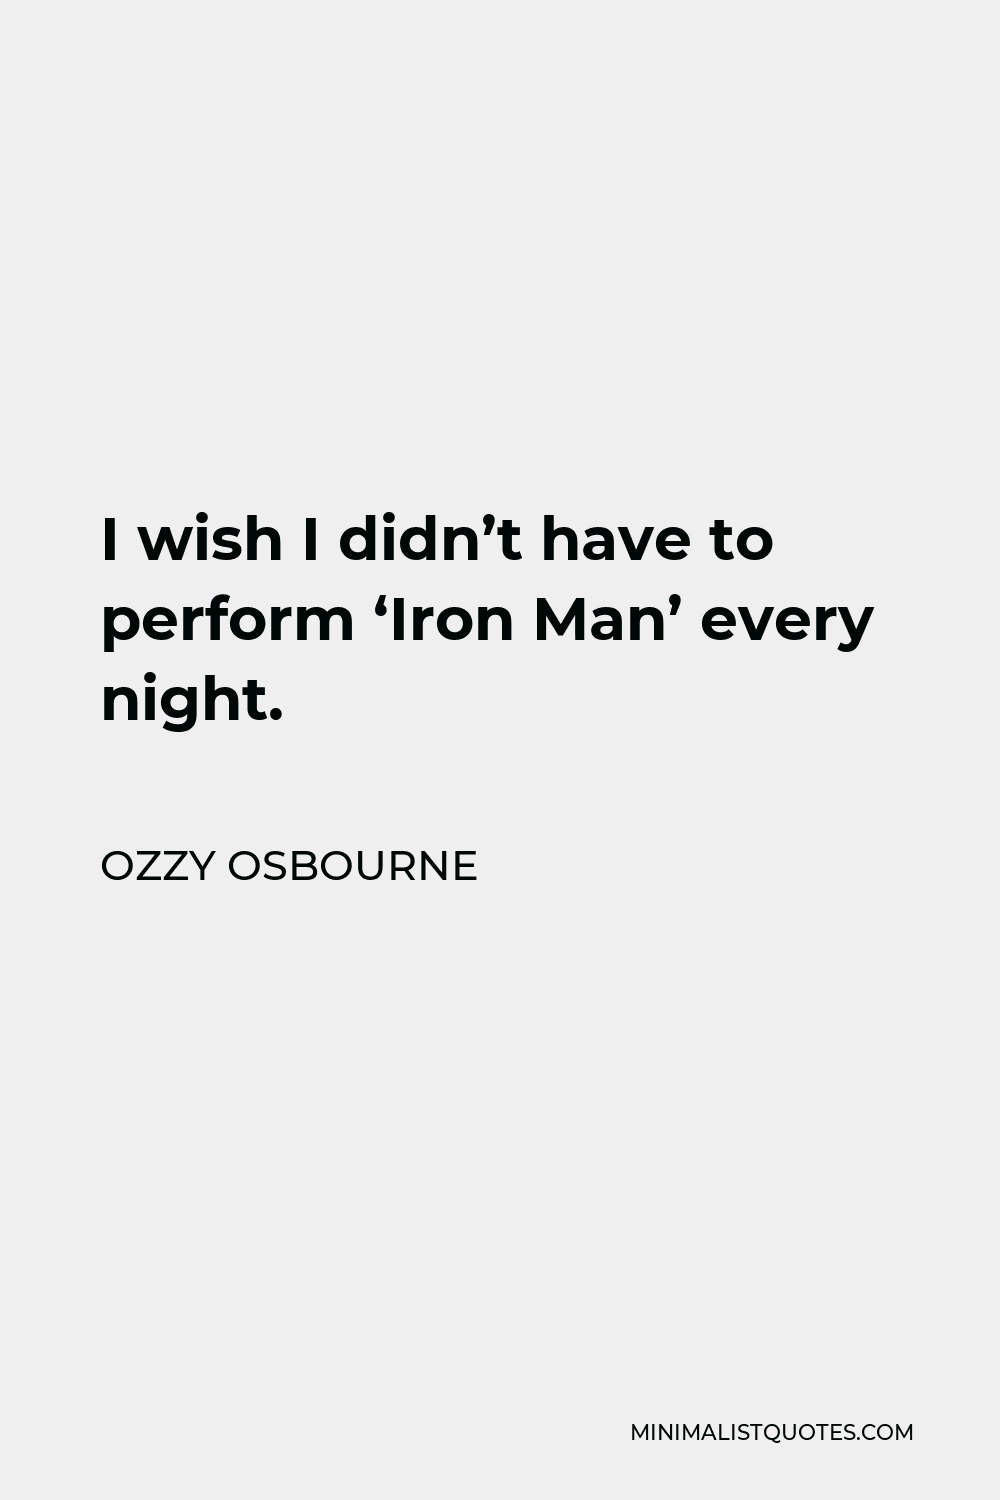 Ozzy Osbourne Quote - I wish I didn’t have to perform ‘Iron Man’ every night.